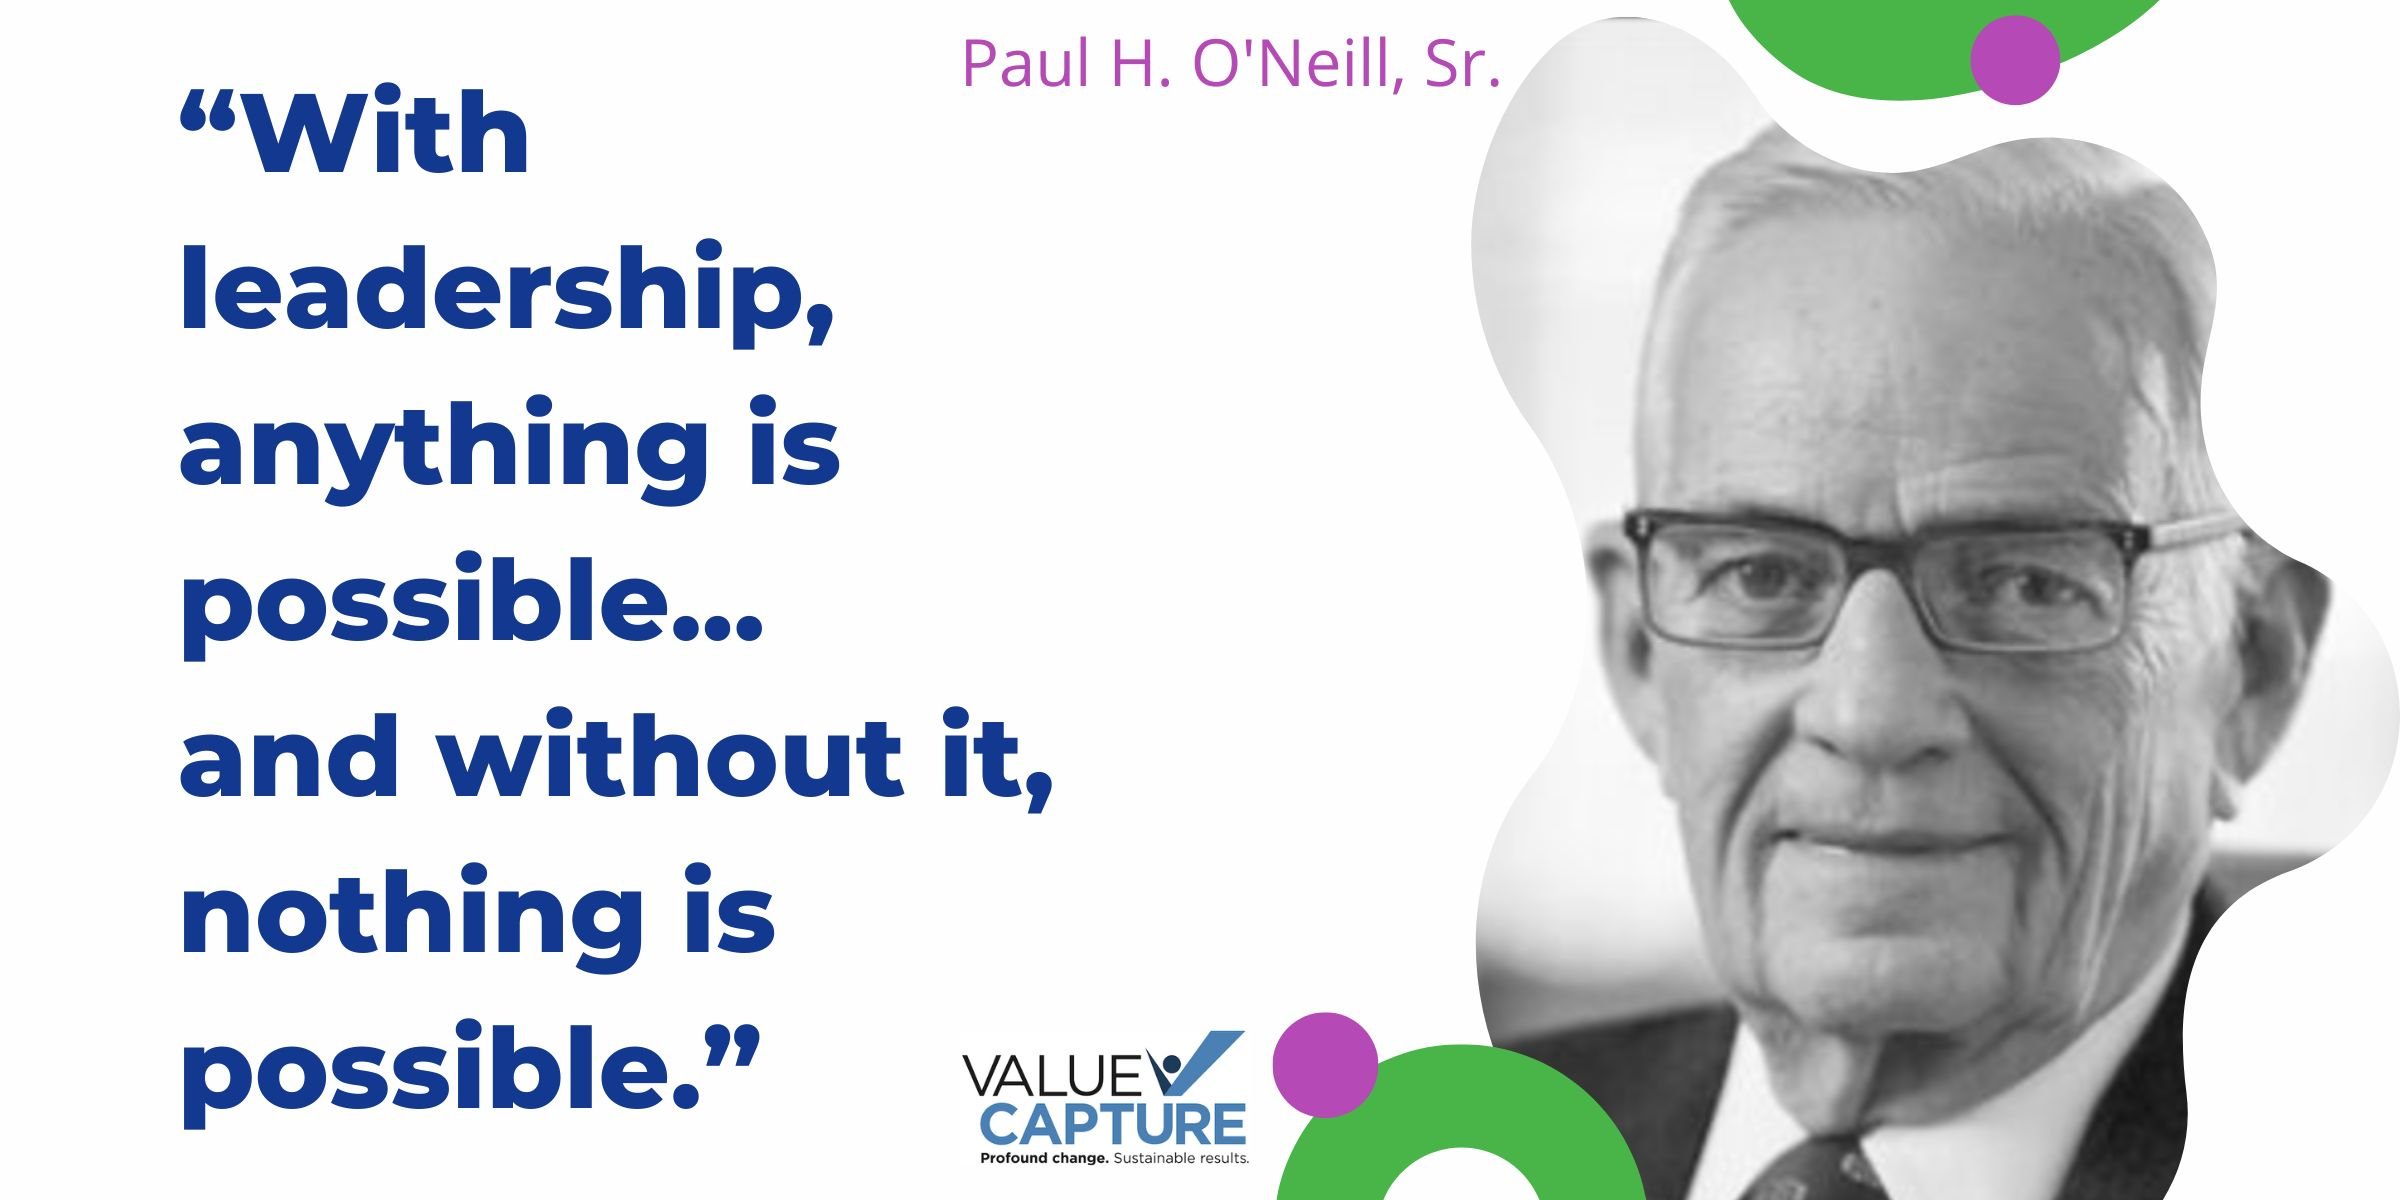 “With  leadership, anything is possible... and without it, nothing is possible.” Paul O'Neill